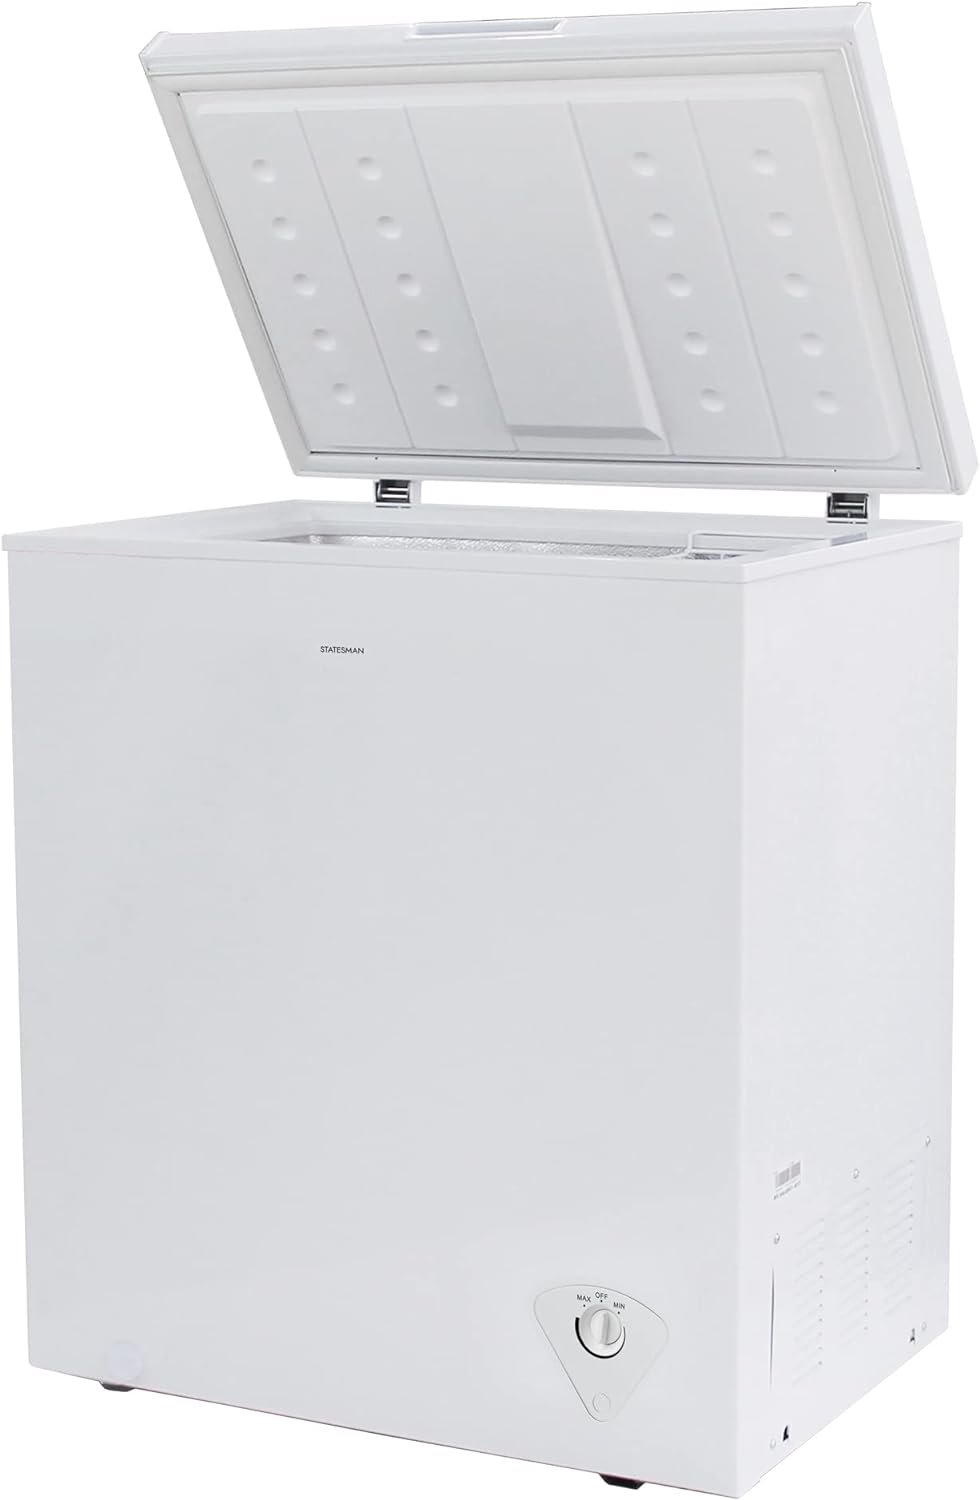 Statesman CHF150 Chest Freezer, 150 Litre, 85 cm Wide, 1x Freezer Basket, Adjustable Feet, Suitable for Outbuildings and Garages, temperatures Down to - 15ºC, White [Energy Class F+] - Amazing Gadgets Outlet